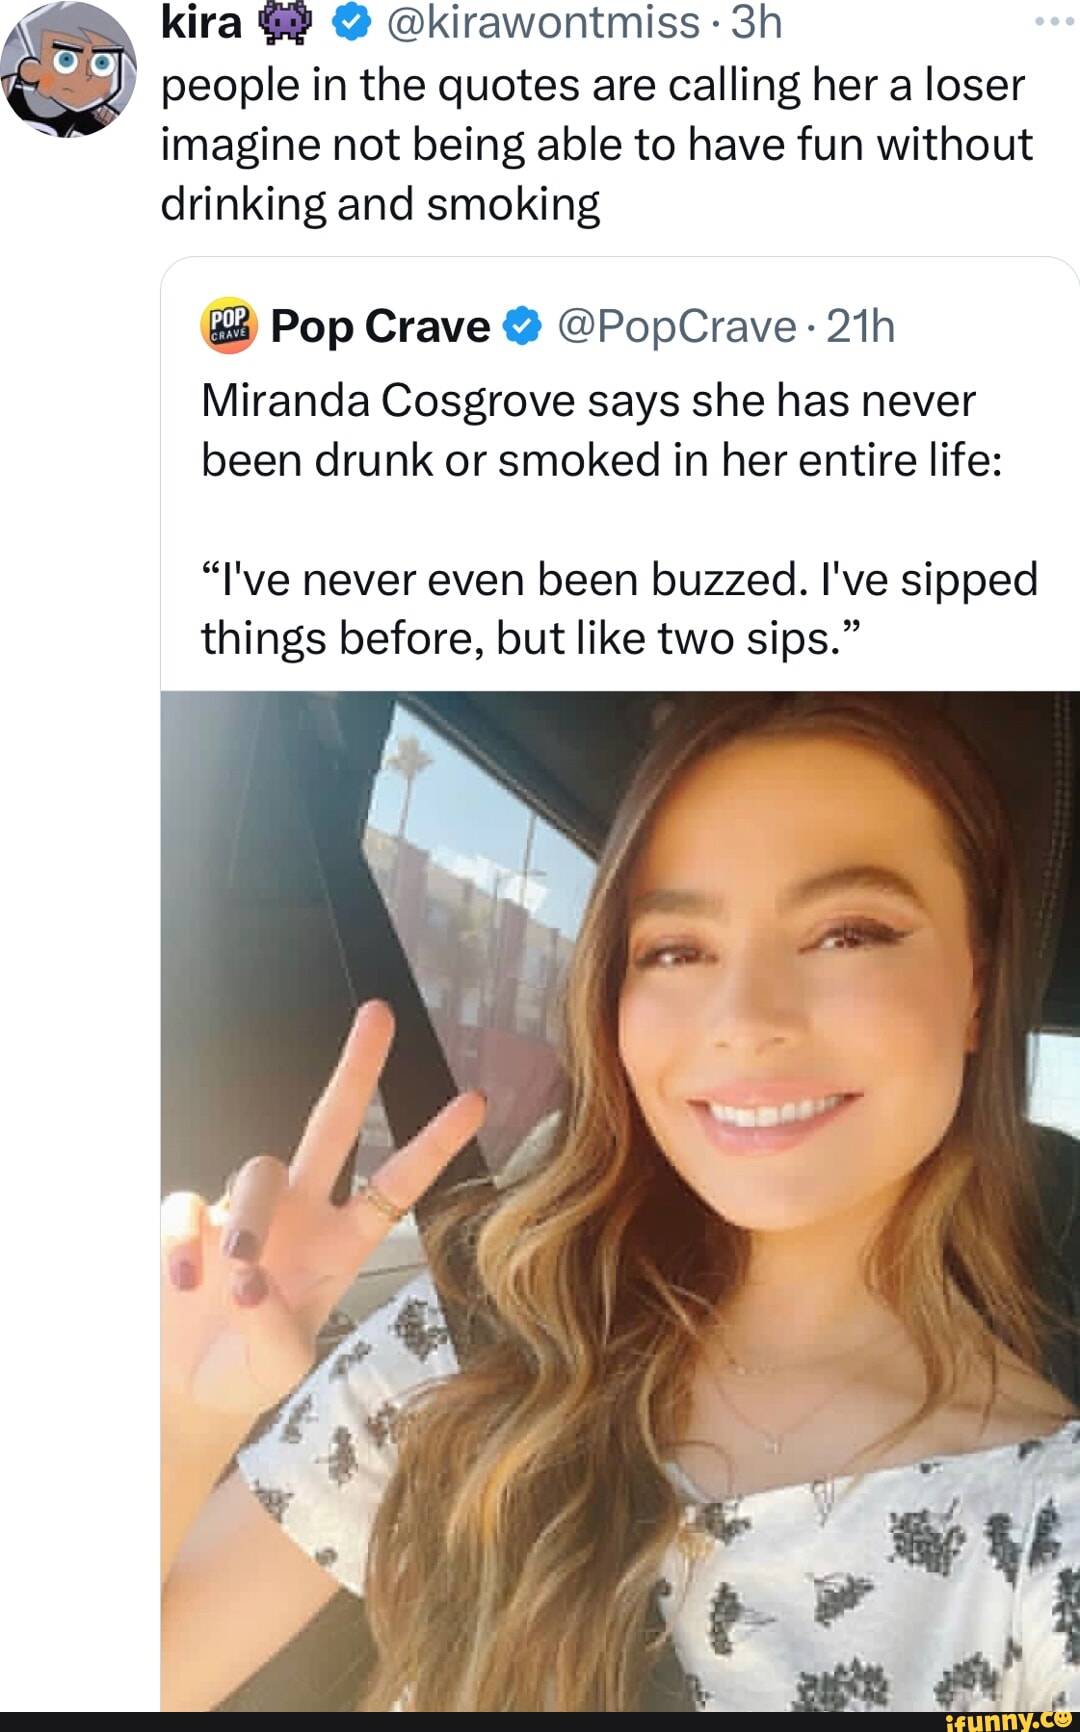 christopher romero recommends miranda cosgrove its good pussy pic